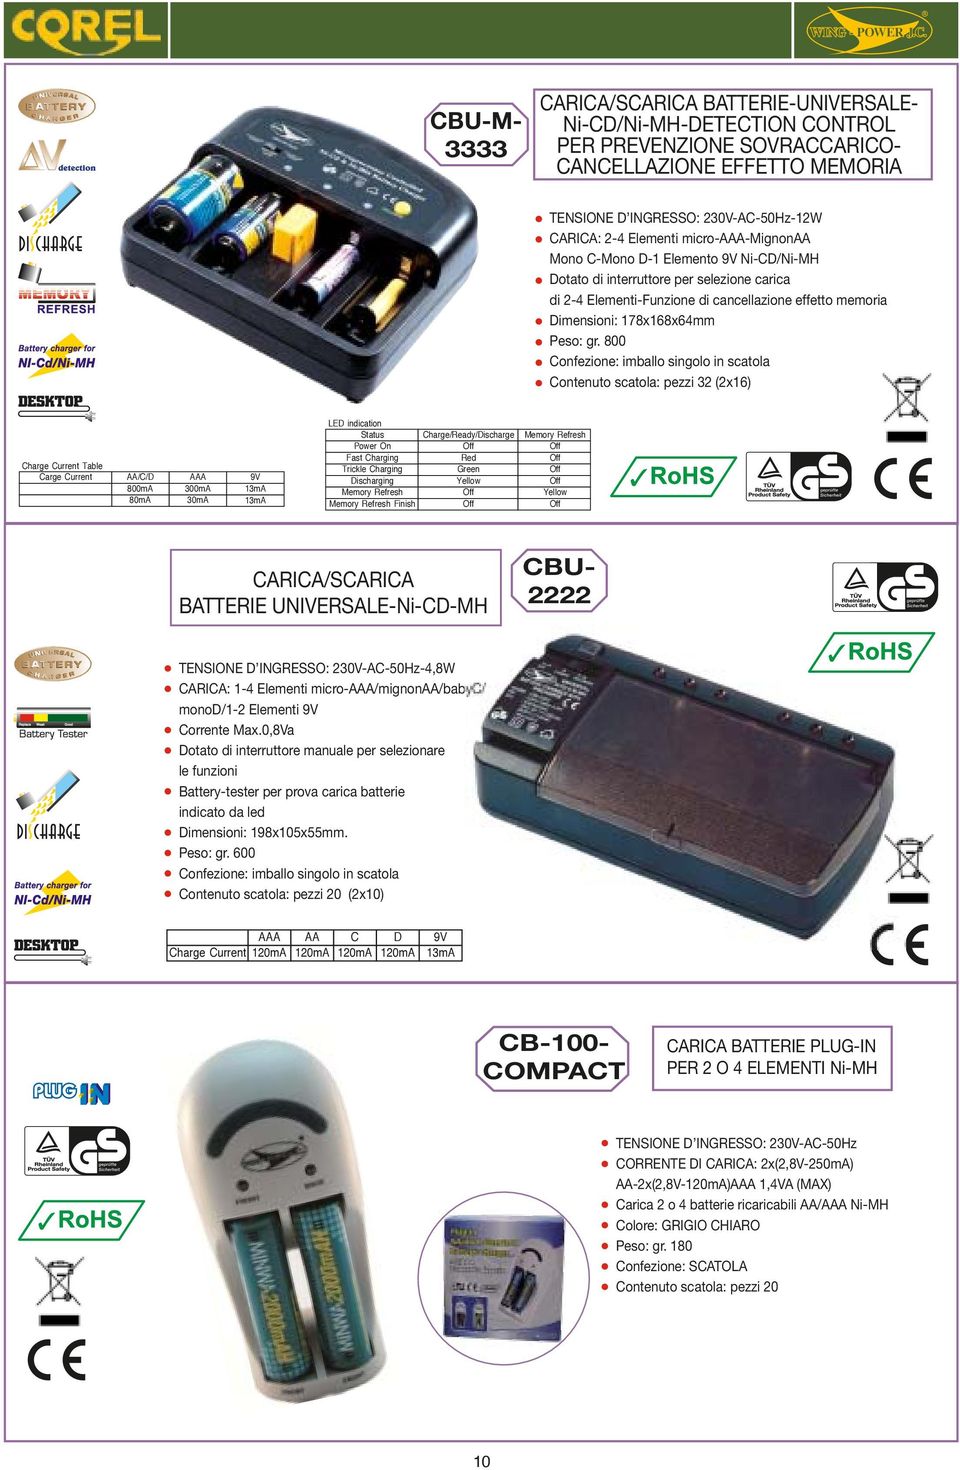 800 Contenuto scatola: pezzi 32 (2x16) Charge Current Table Carge Current AA/C/D 800mA 80mA AAA 300mA 30mA 9V 13mA 13mA LED indication Status Power On Fast Charging Trickle Charging Discharging